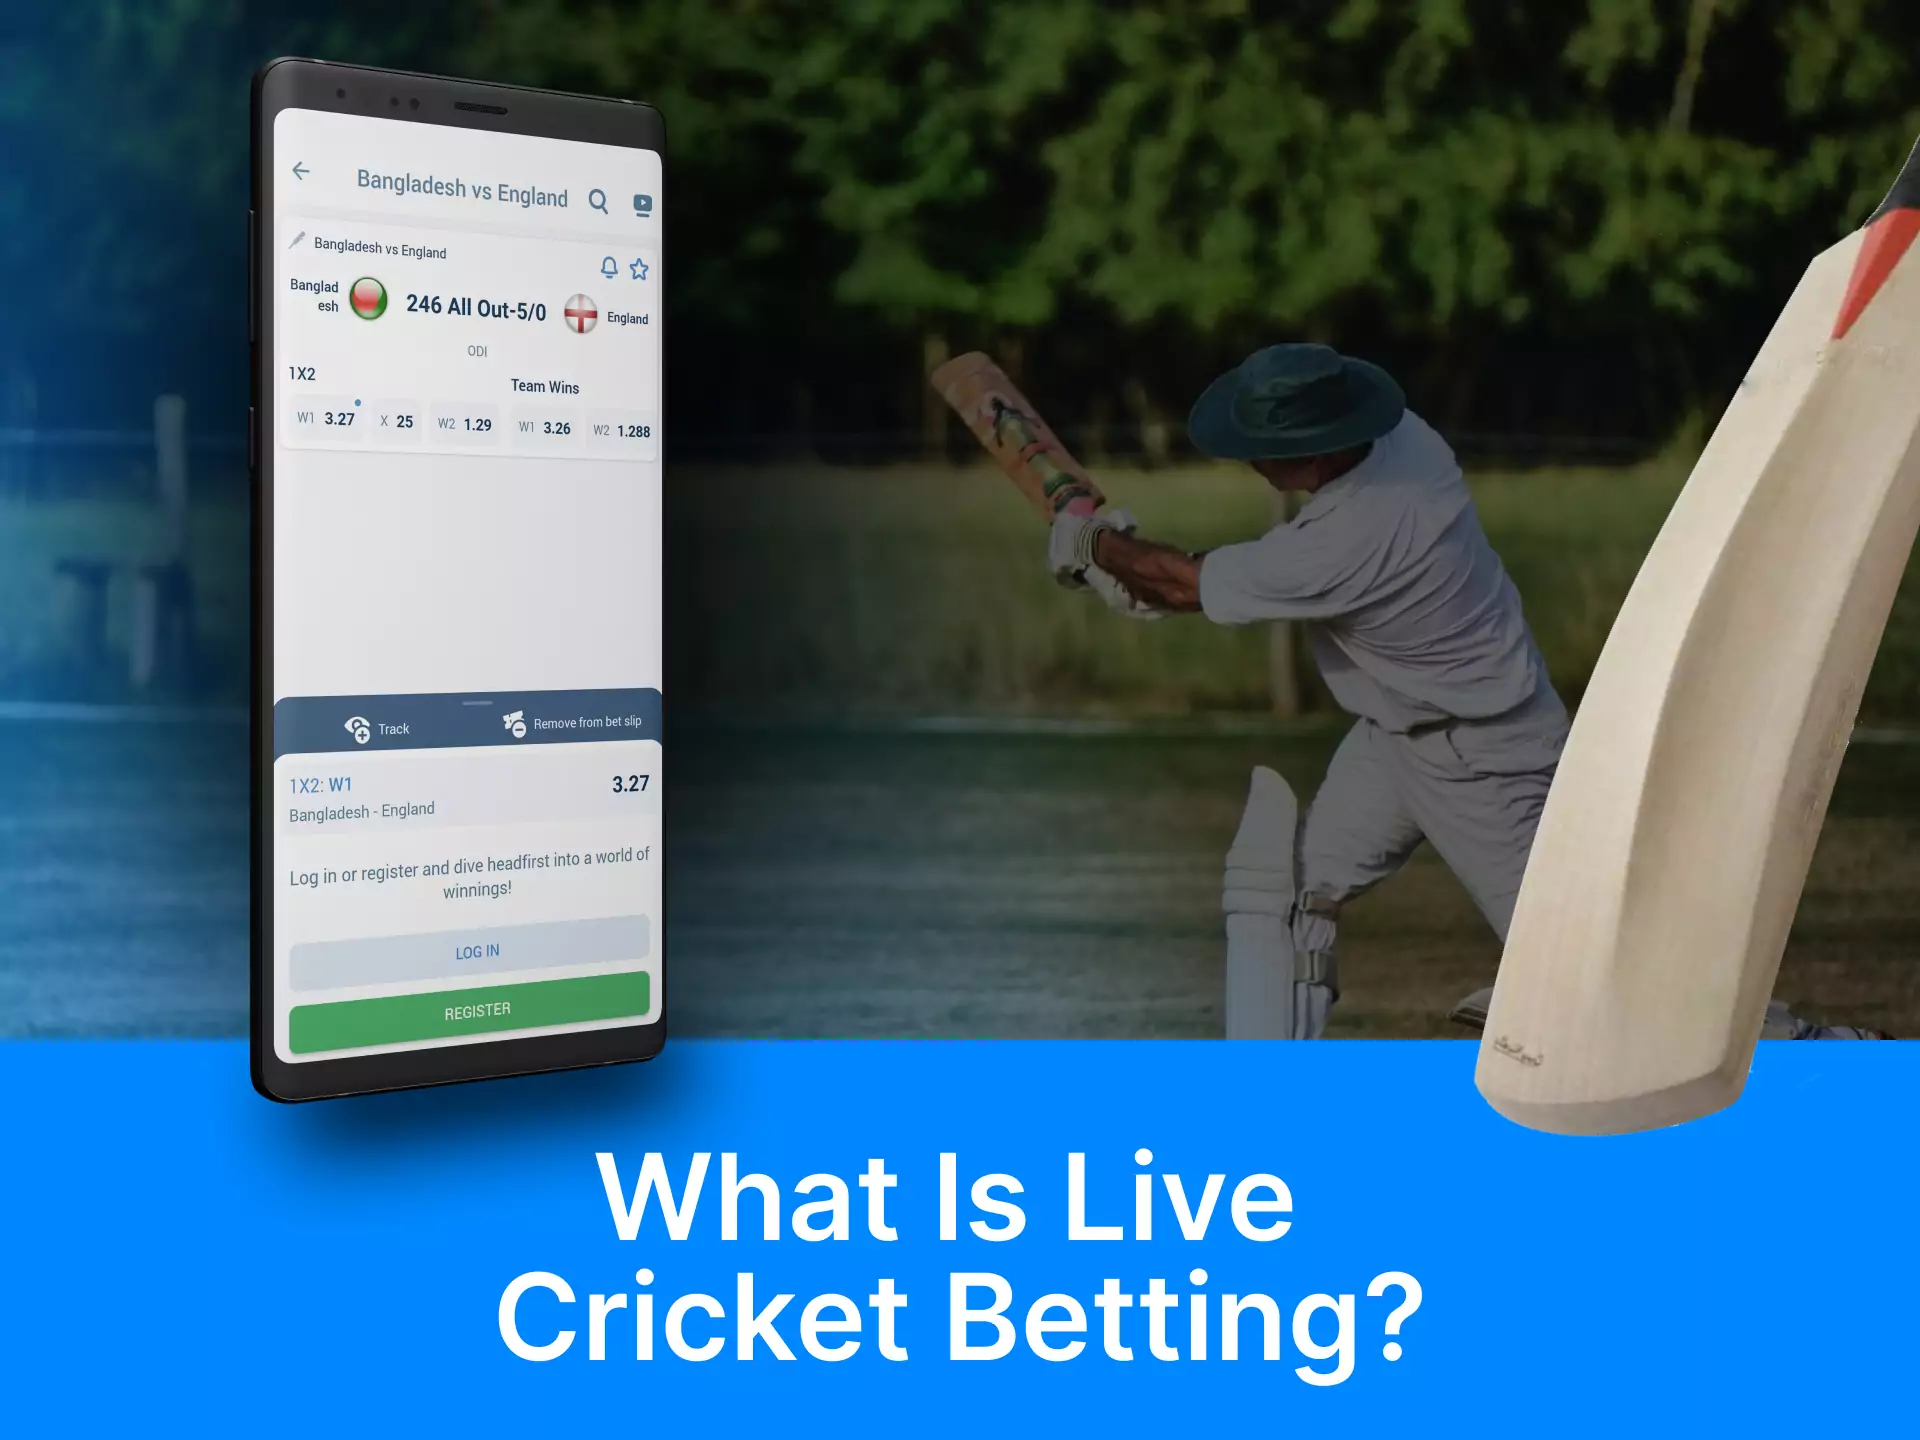 In the apps, you can place bets on live events.